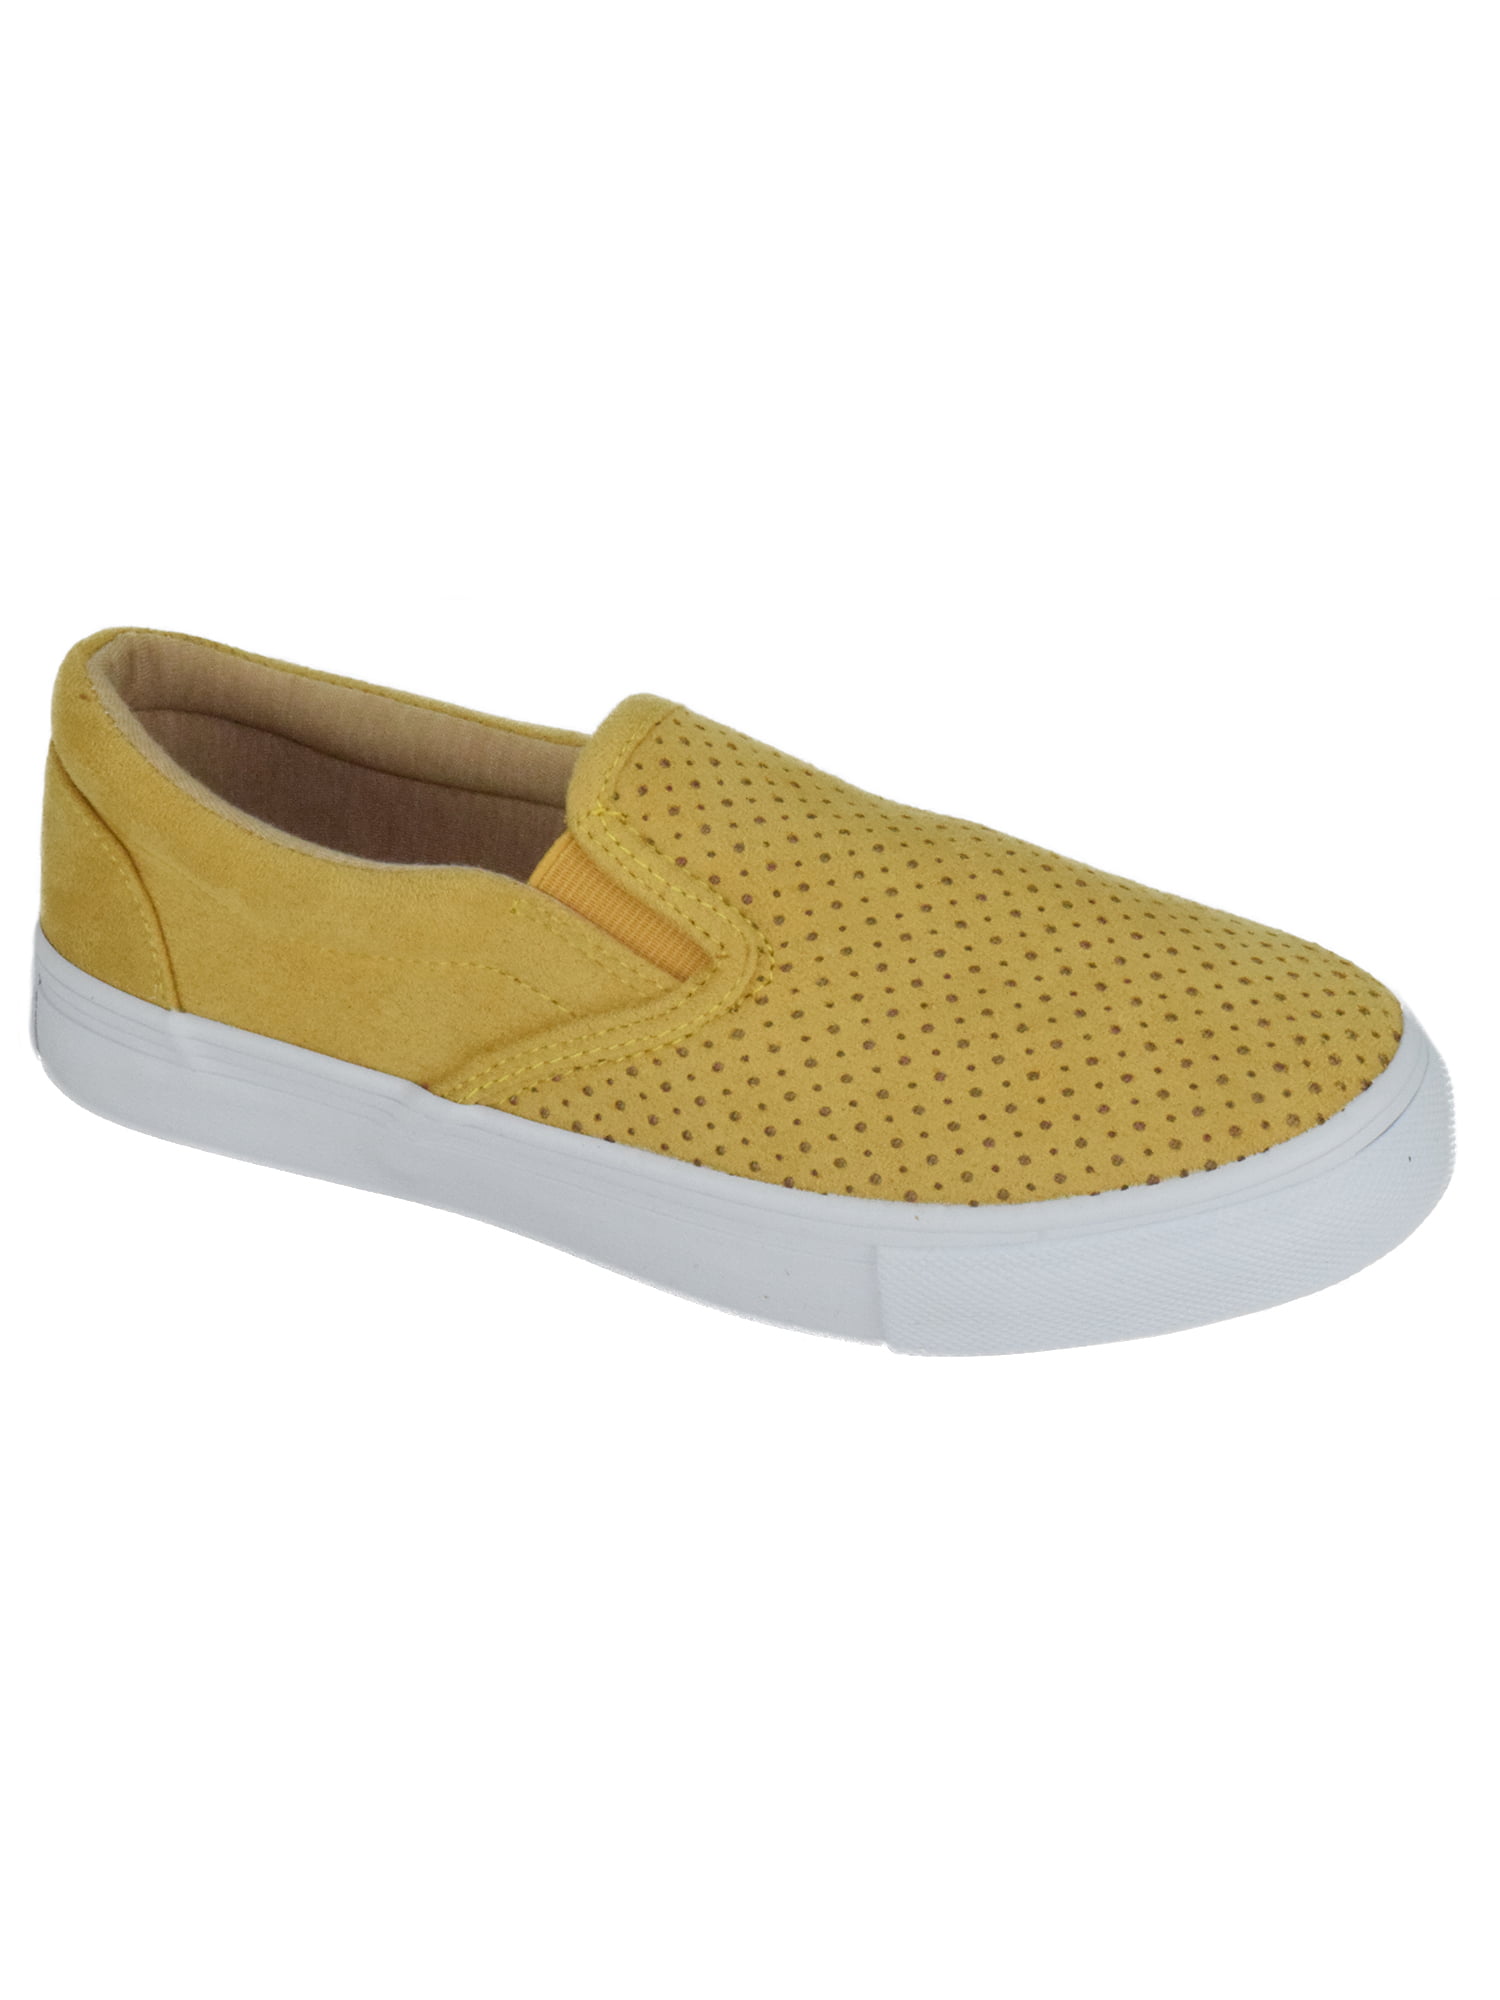 Soda Tracer Sun Yellow Slip On Fashion Casual Perforated Sneakers 